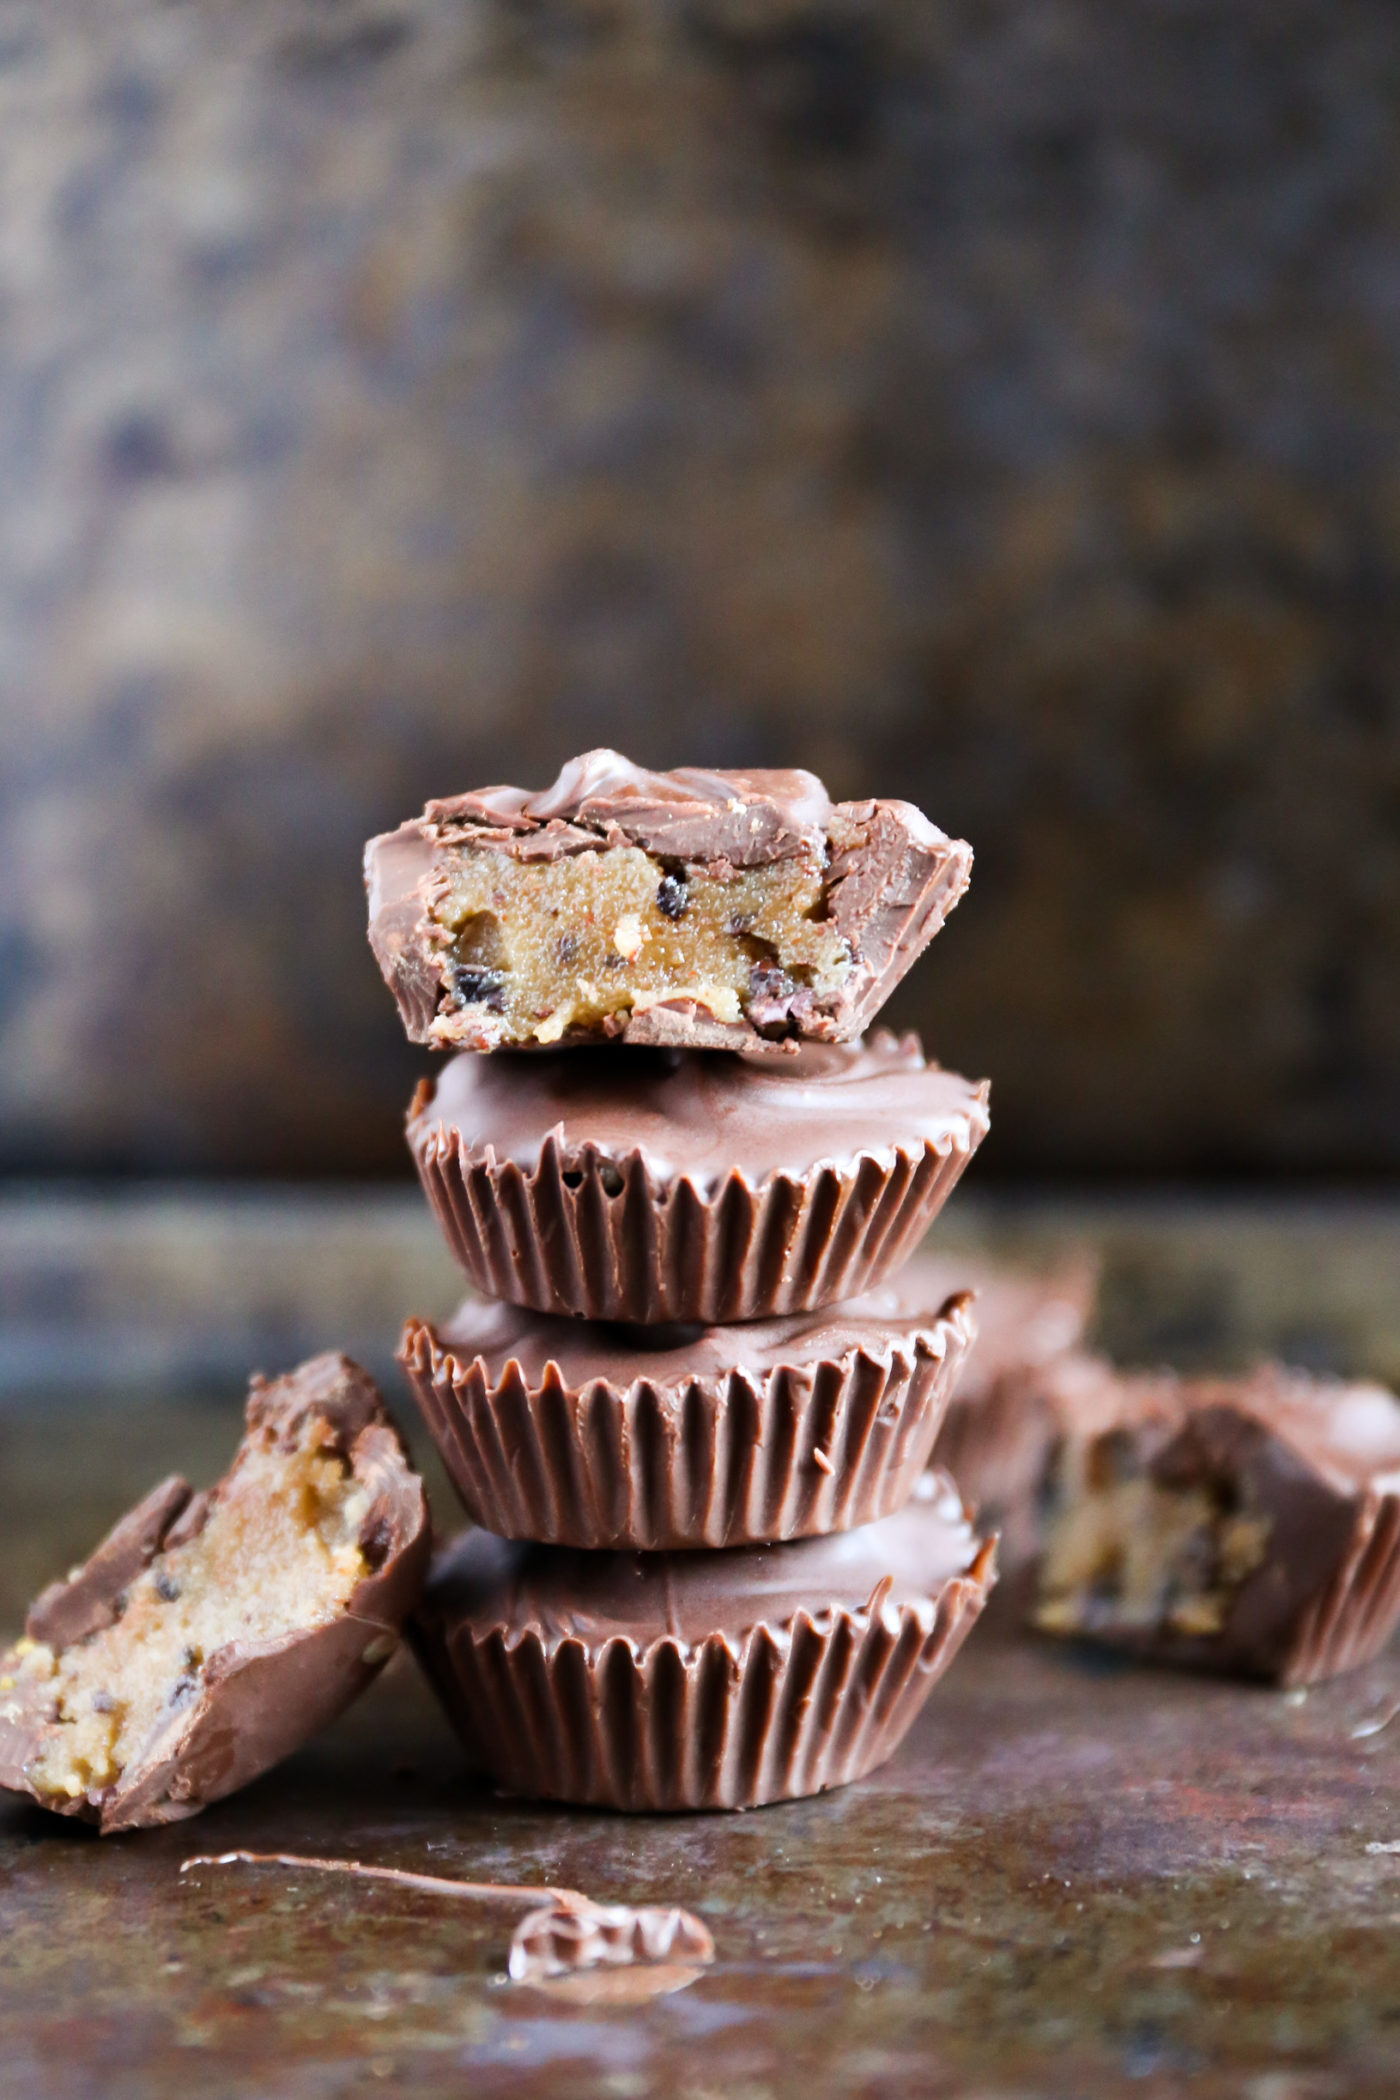 Healthy Chocolate Covered Cookie Dough Cups (gluten free!)